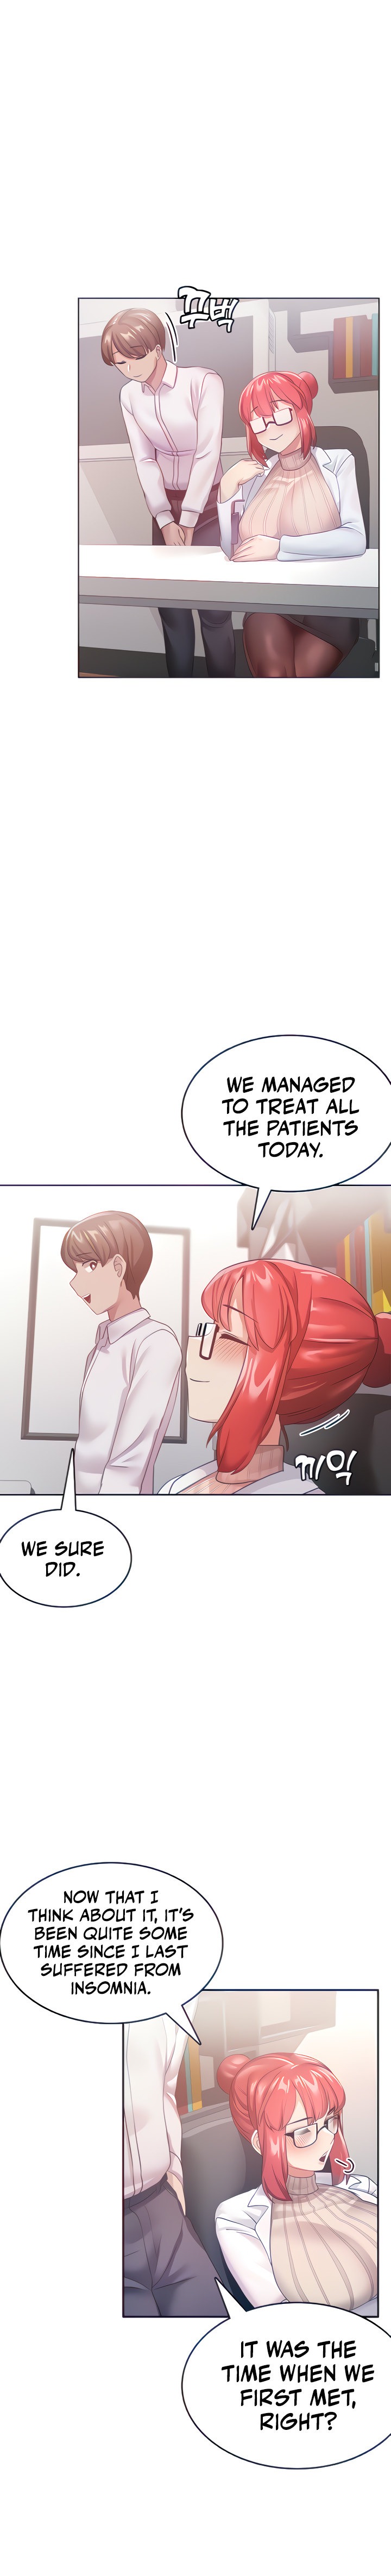 Relationship Reverse Button: Let’s Cure That Arrogant Girl - Chapter 9 Page 4